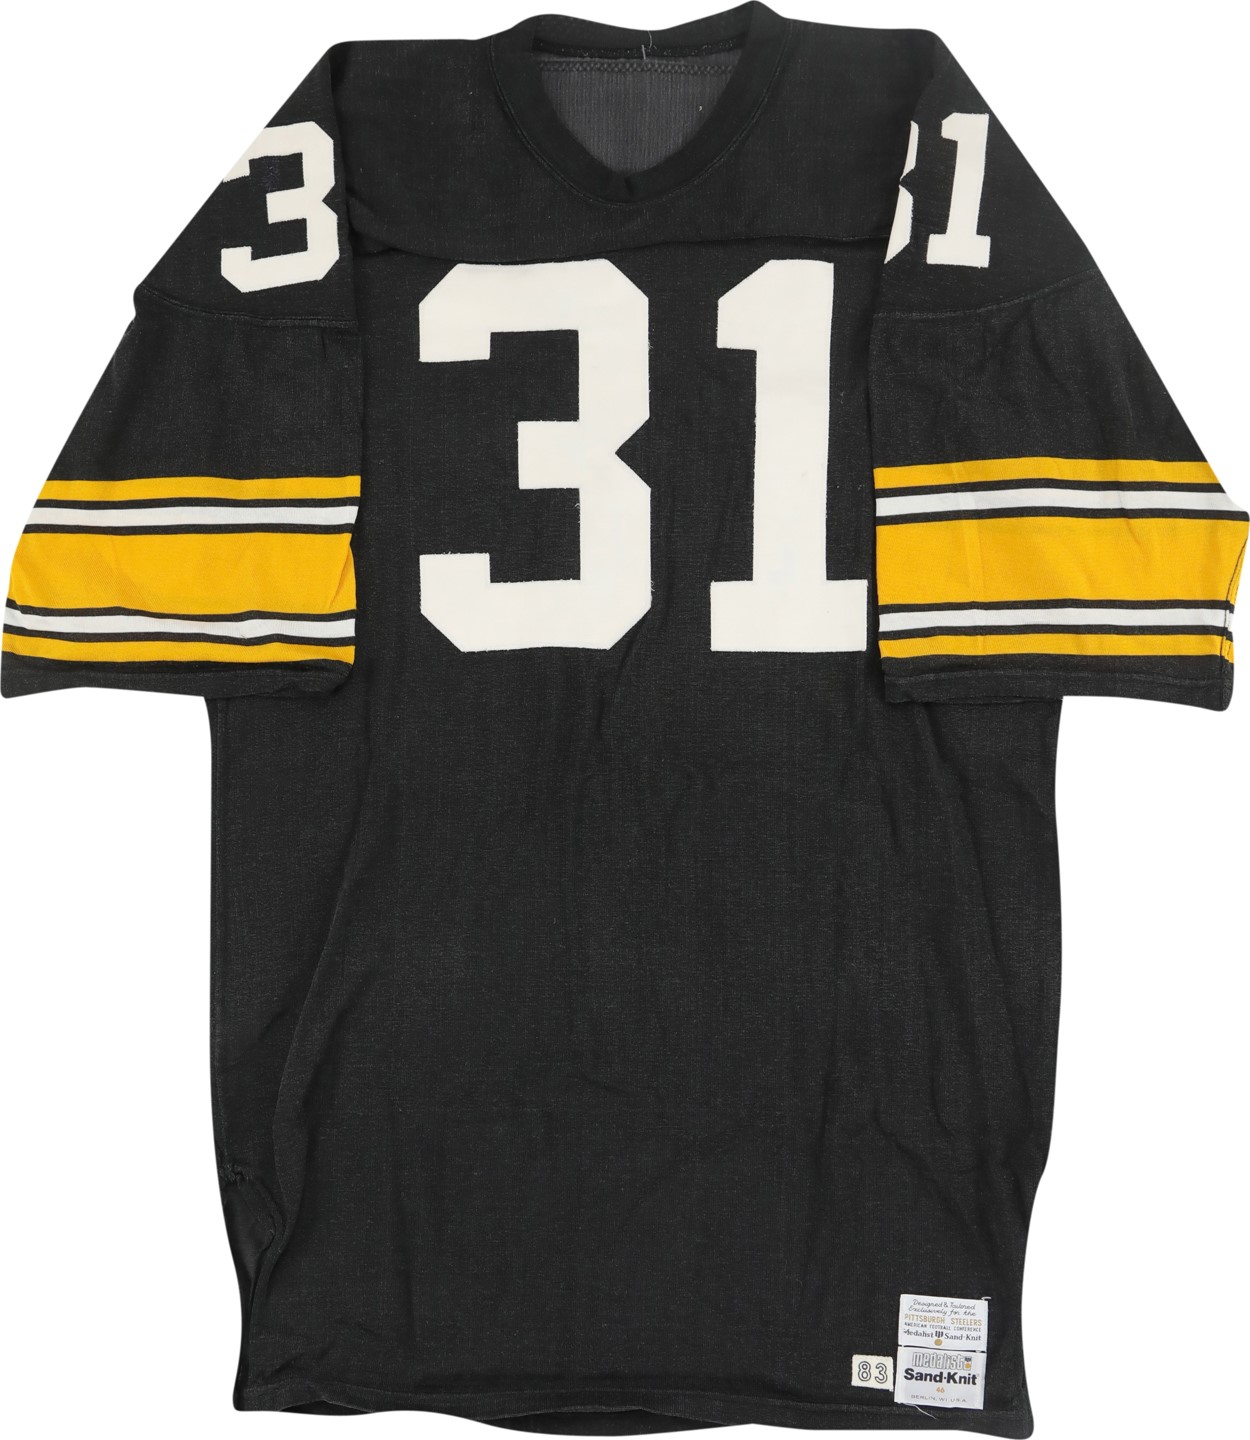 The Pittsburgh Steelers Game Worn Jersey Archive - 1983 Donnie Shell Pittsburgh Steelers Game Worn Jersey (Photo-Matched)